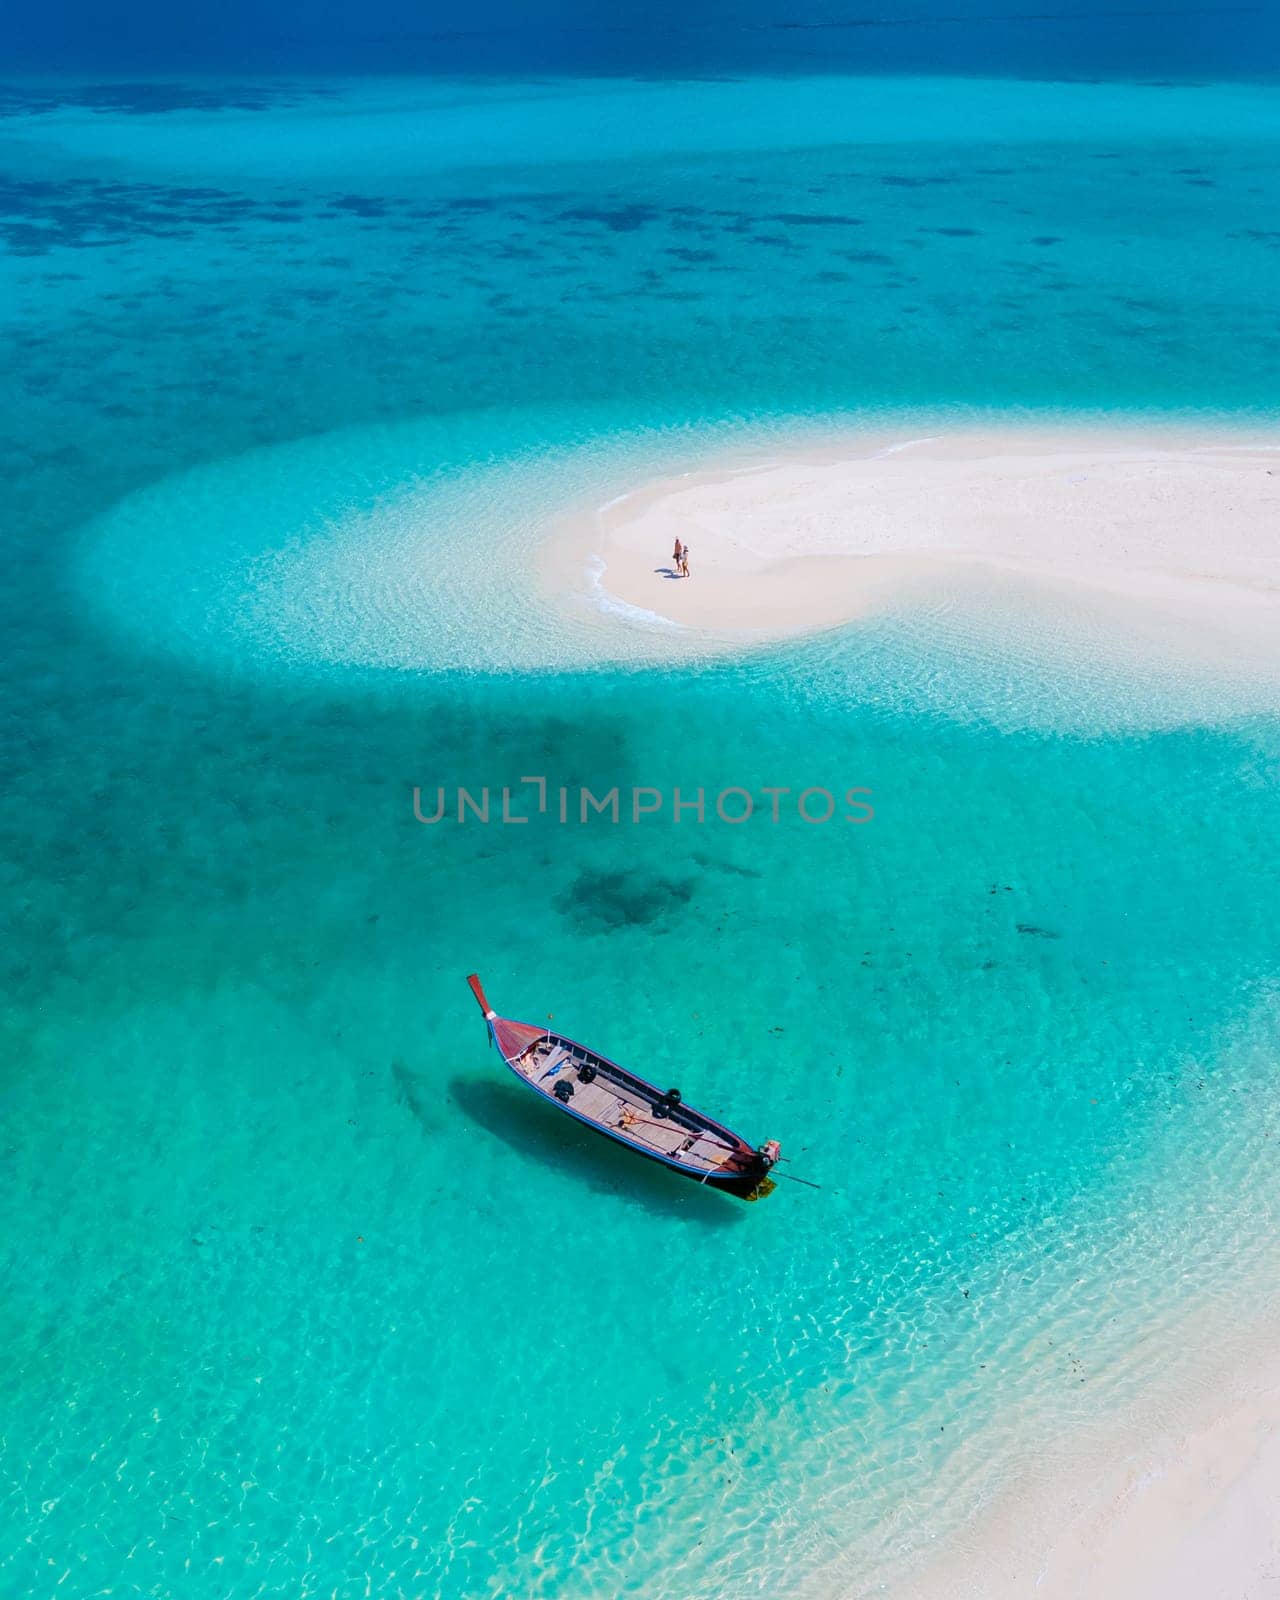 couple of men and women on the beach of Ko Lipe Island Thailand. drone aerial view of a sandbank in the ocean on a sunny day